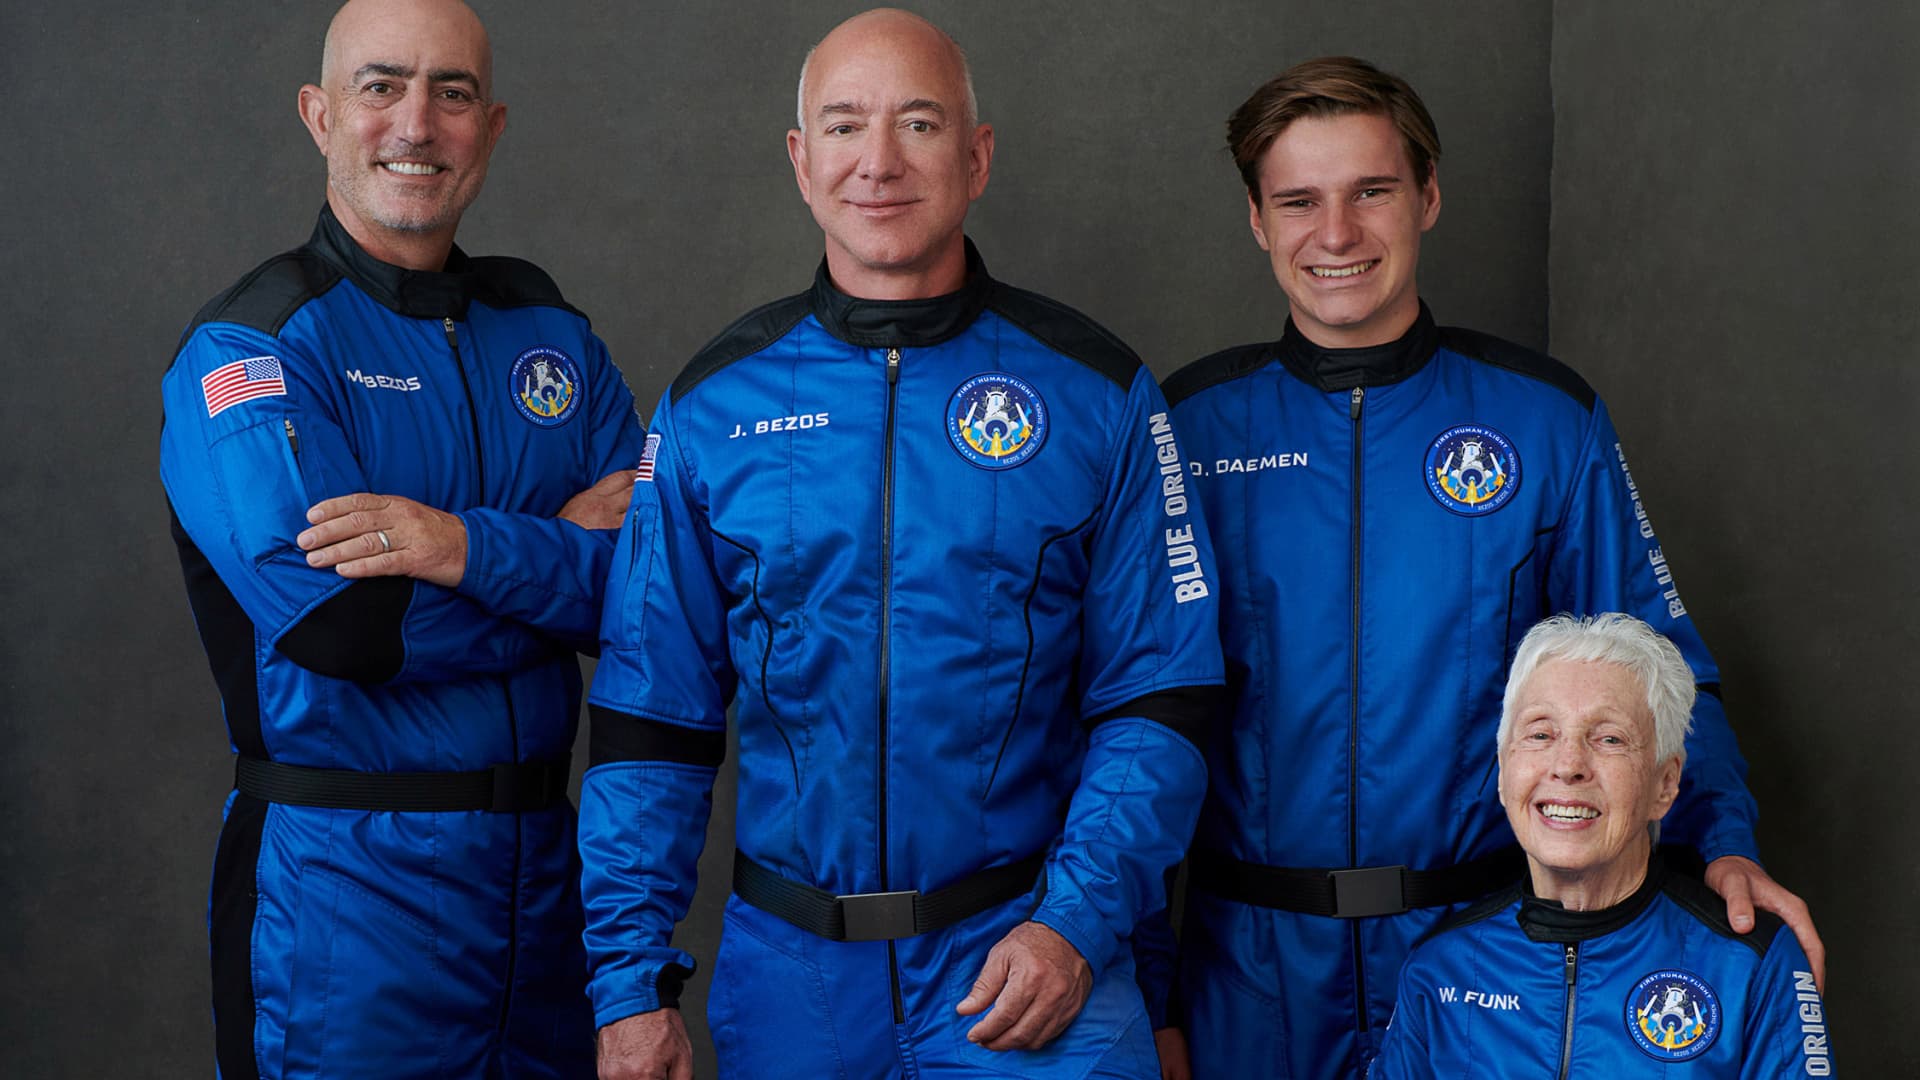 Billionaire Jeff Bezos, founder of ecommerce company Amazon.com Inc, his brother Mark Bezos, a private equity executive, pioneering female aviator Wally Funk and recent Dutch high school graduate Oliver Daemen pose in an undated photograph, ahead of their scheduled flight aboard Blue Origin's New Shepard rocket near Van Horn, Texas, U.S.